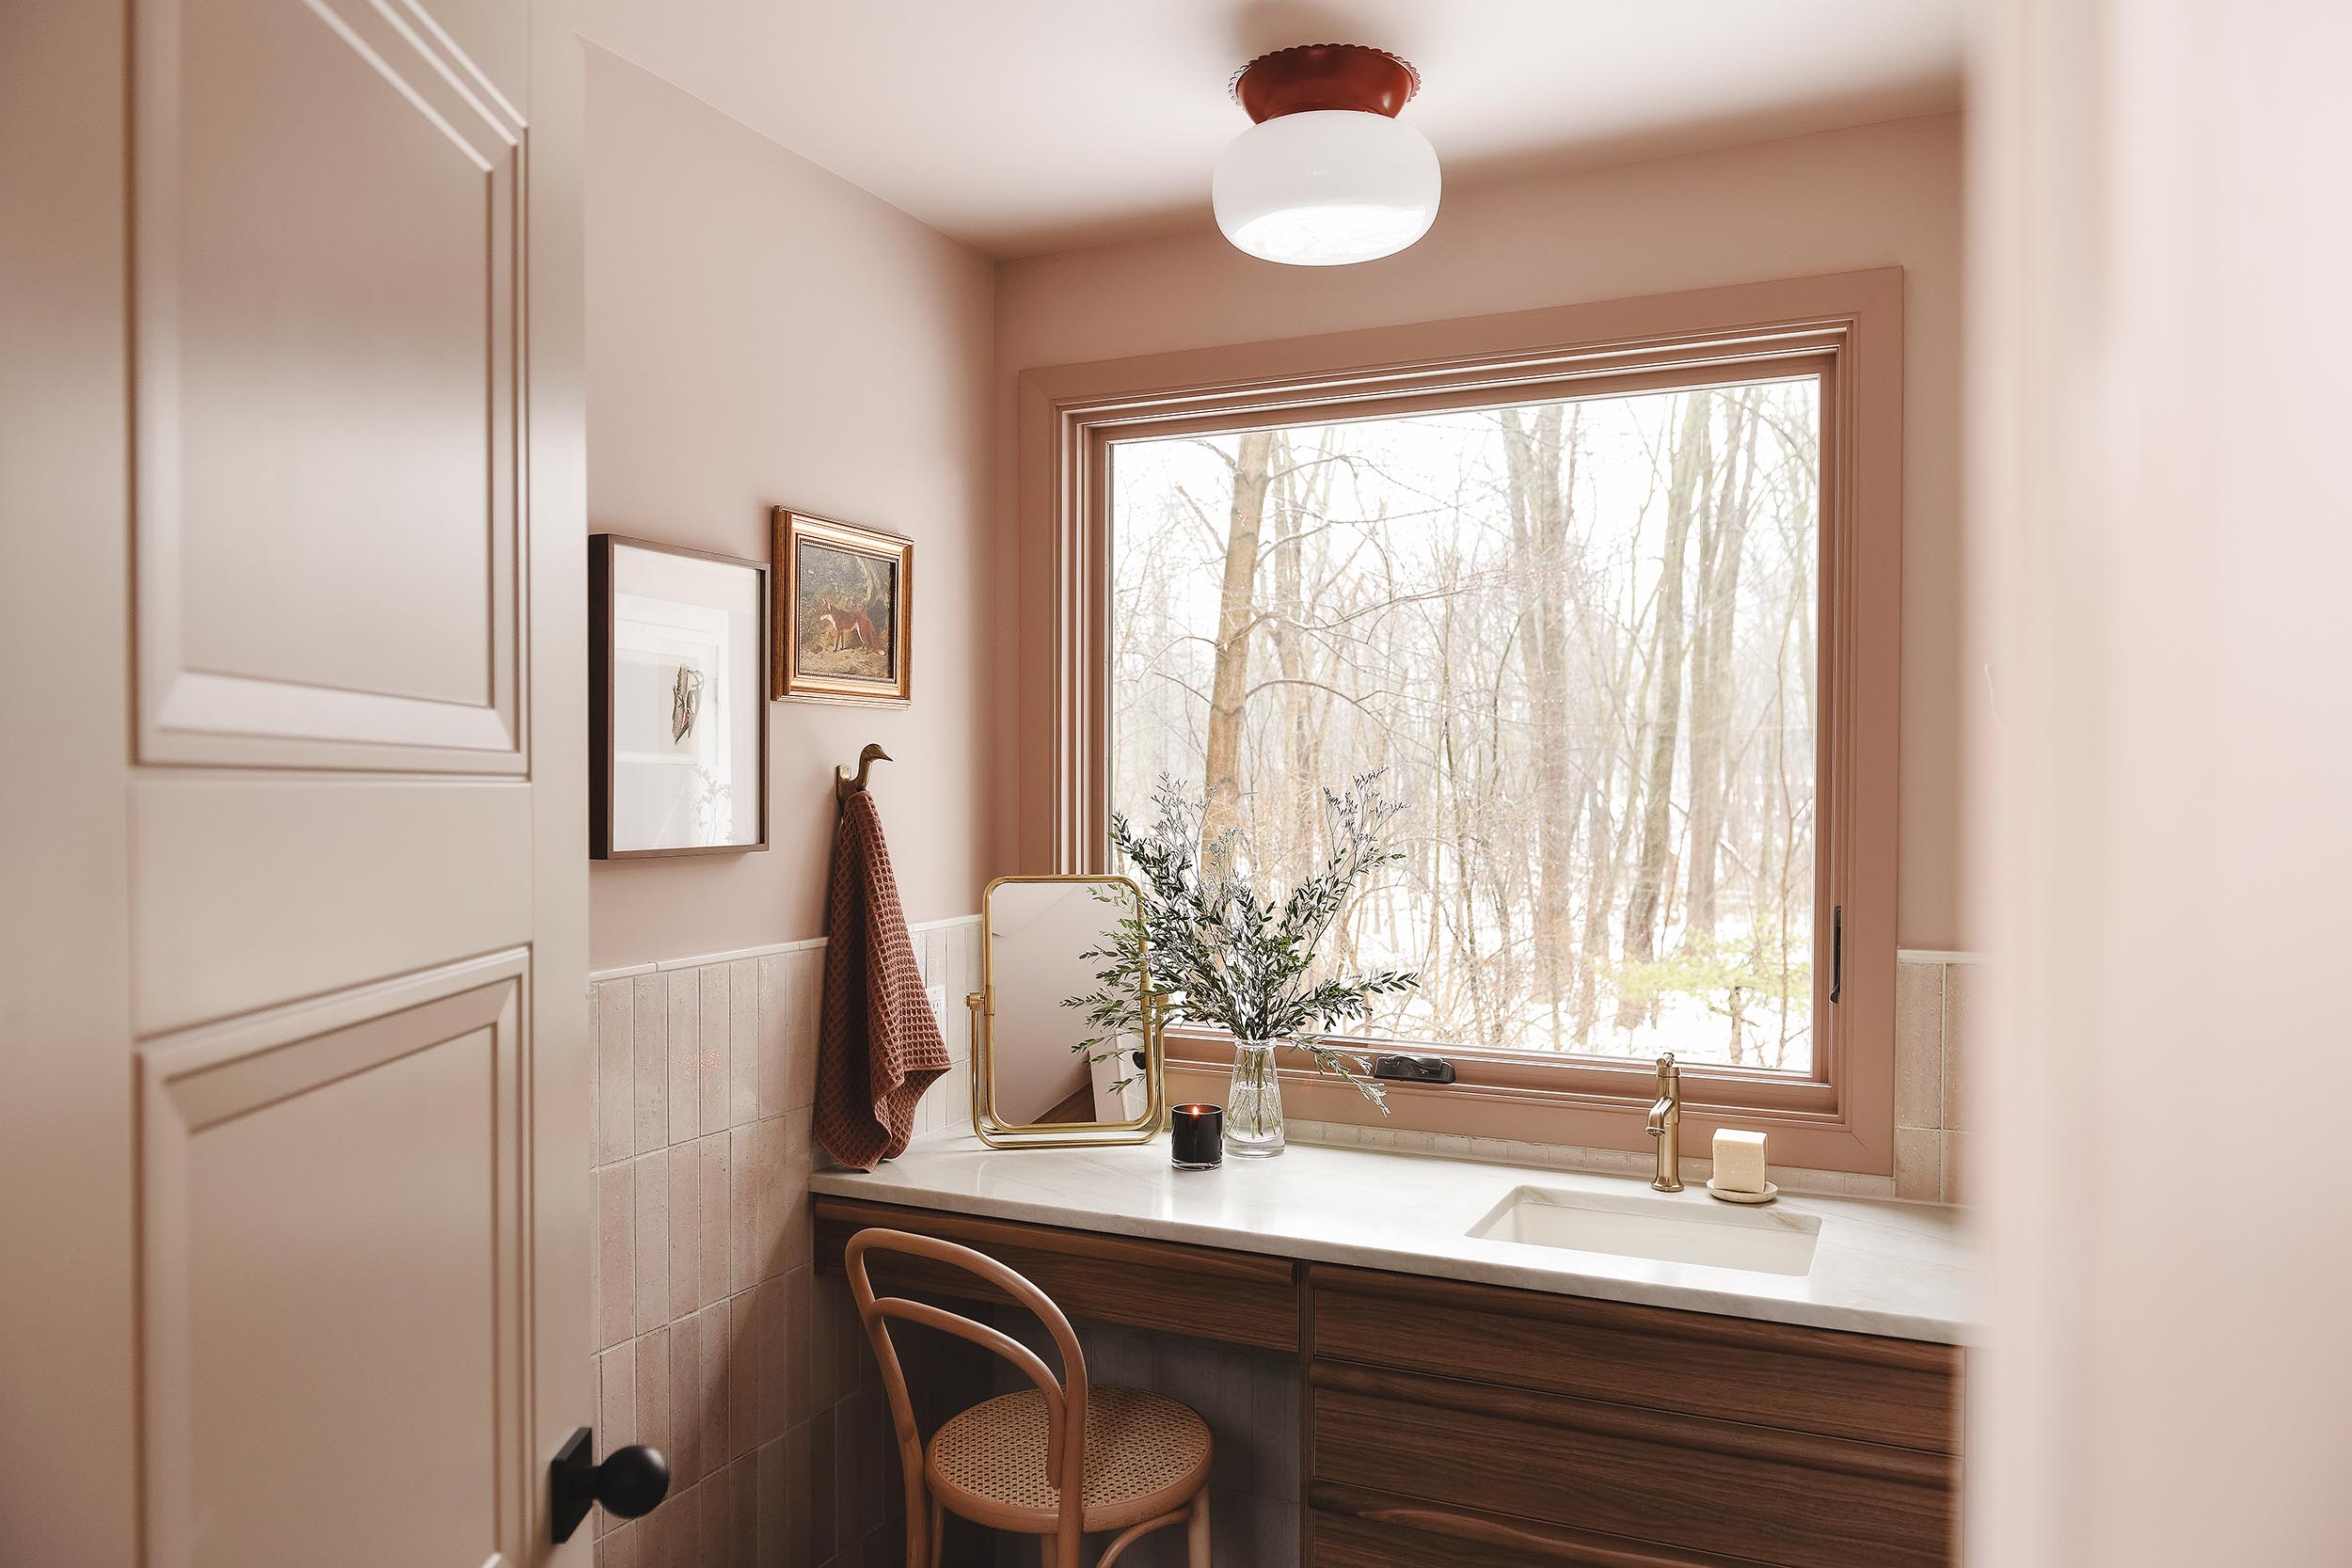 A peek into the pink and taupe bathroom | via Yellow Brick Home